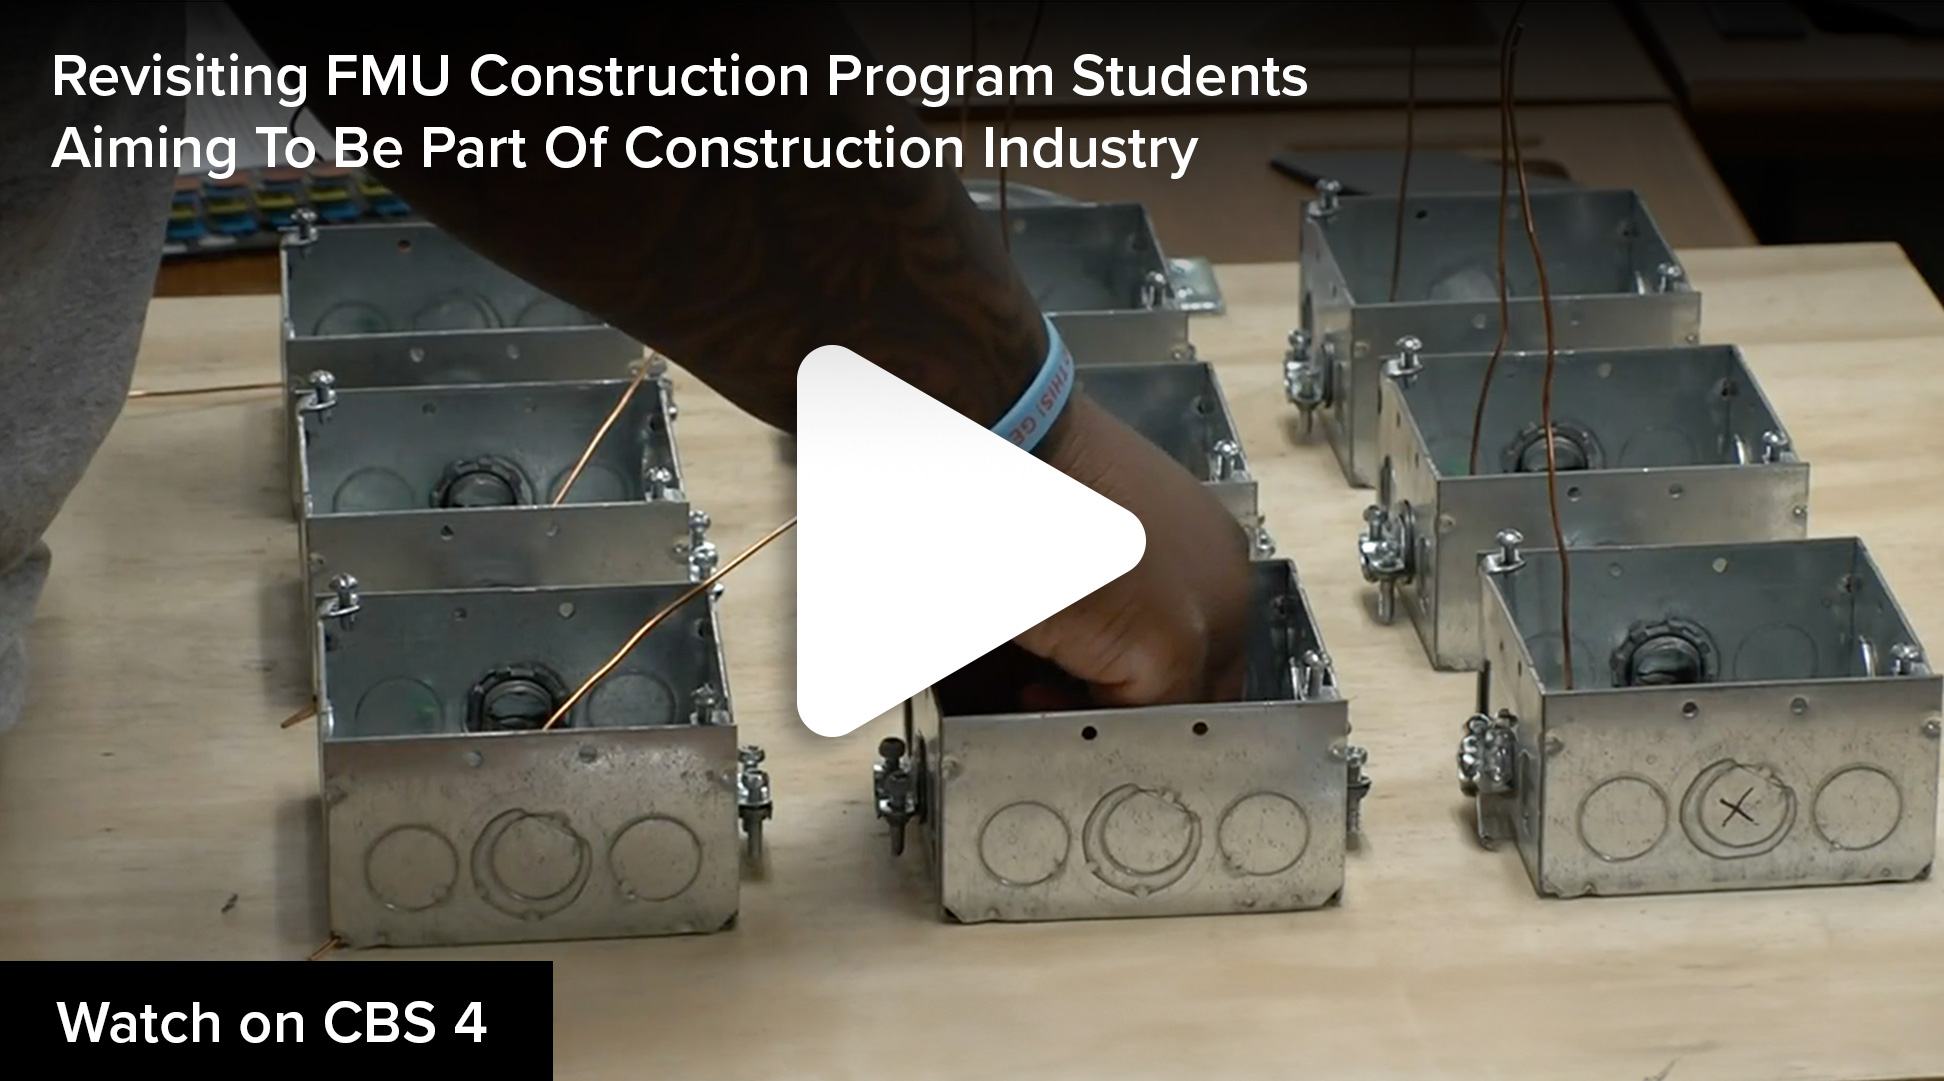 Revisiting FMU Construction Program Students Aiming To Be Part Of Construction Industry